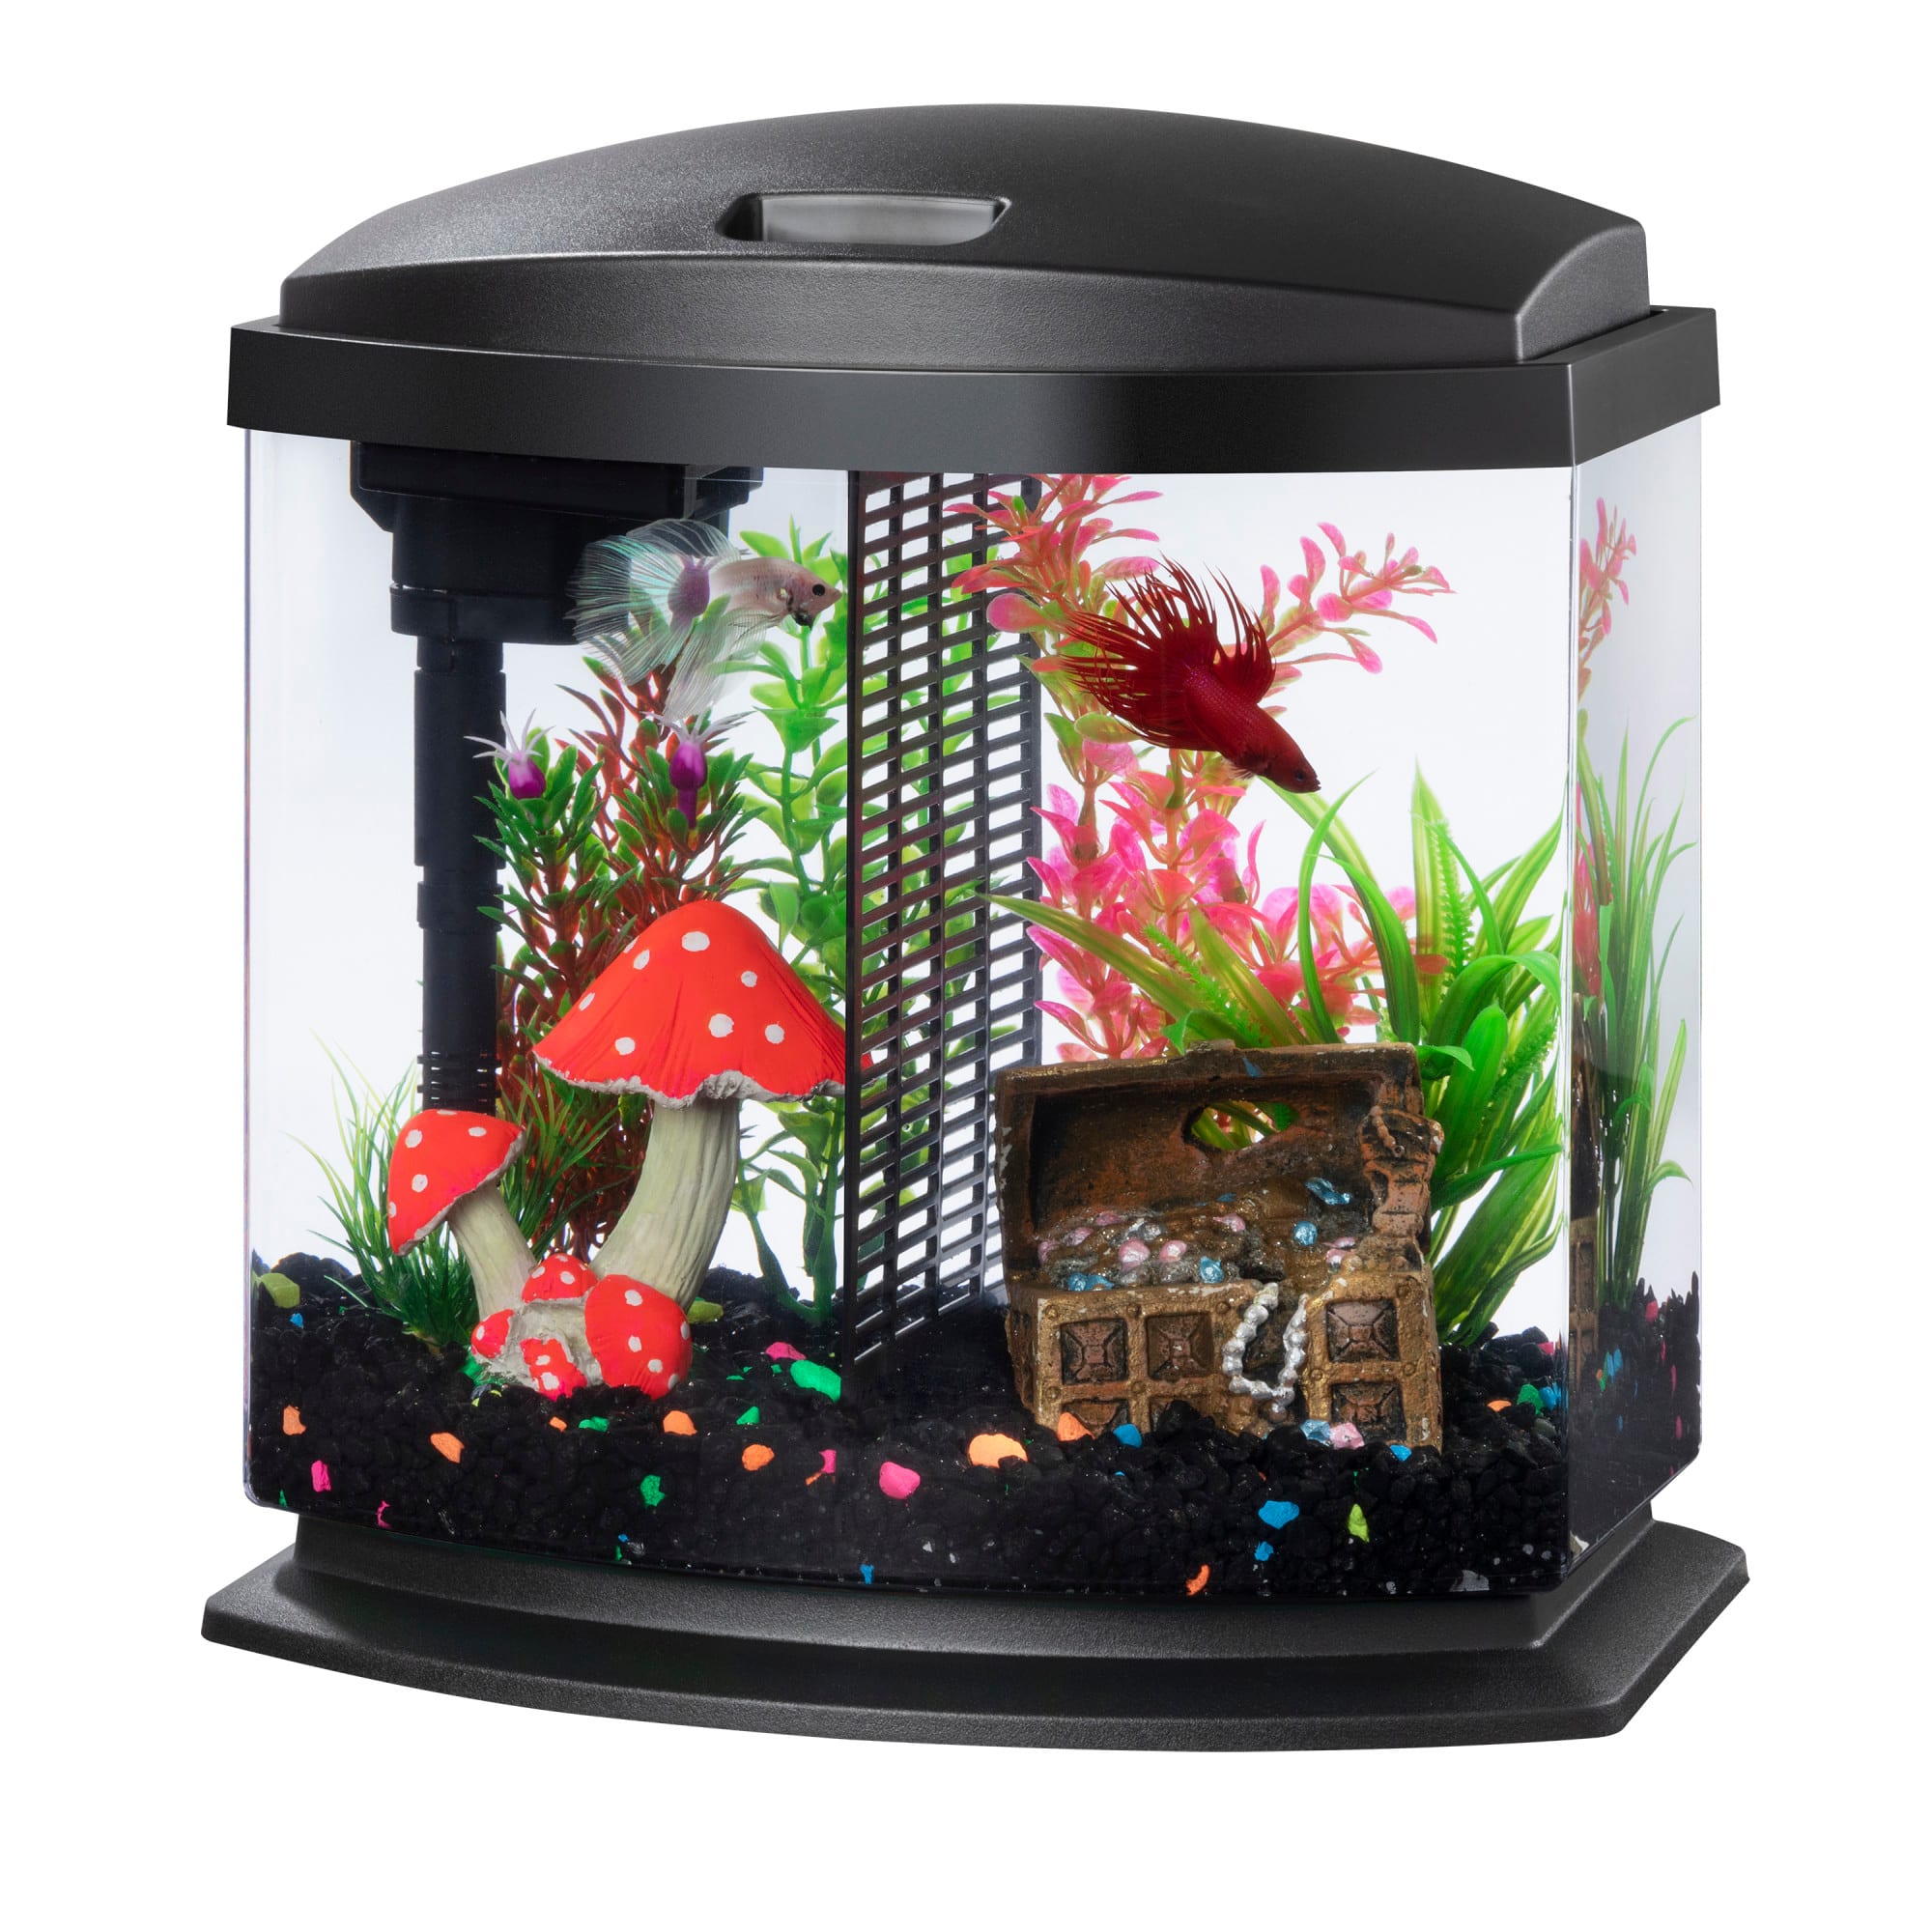 Detailed tutorial for setting up a betta fish tank